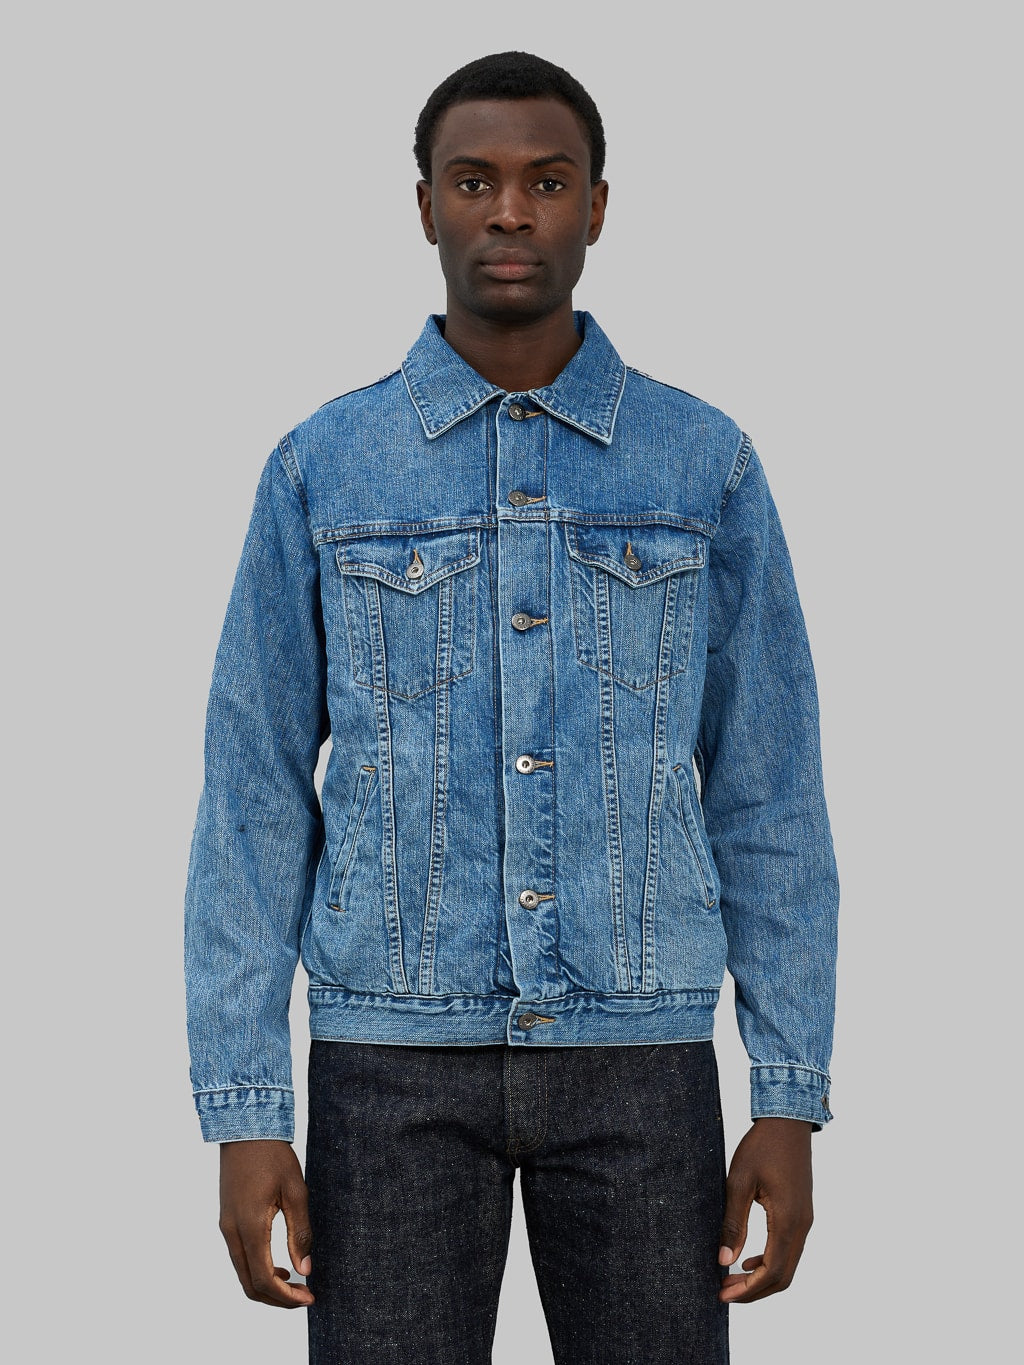 3sixteen Type 3s Denim Jacket Washed 101x 12oz front fit